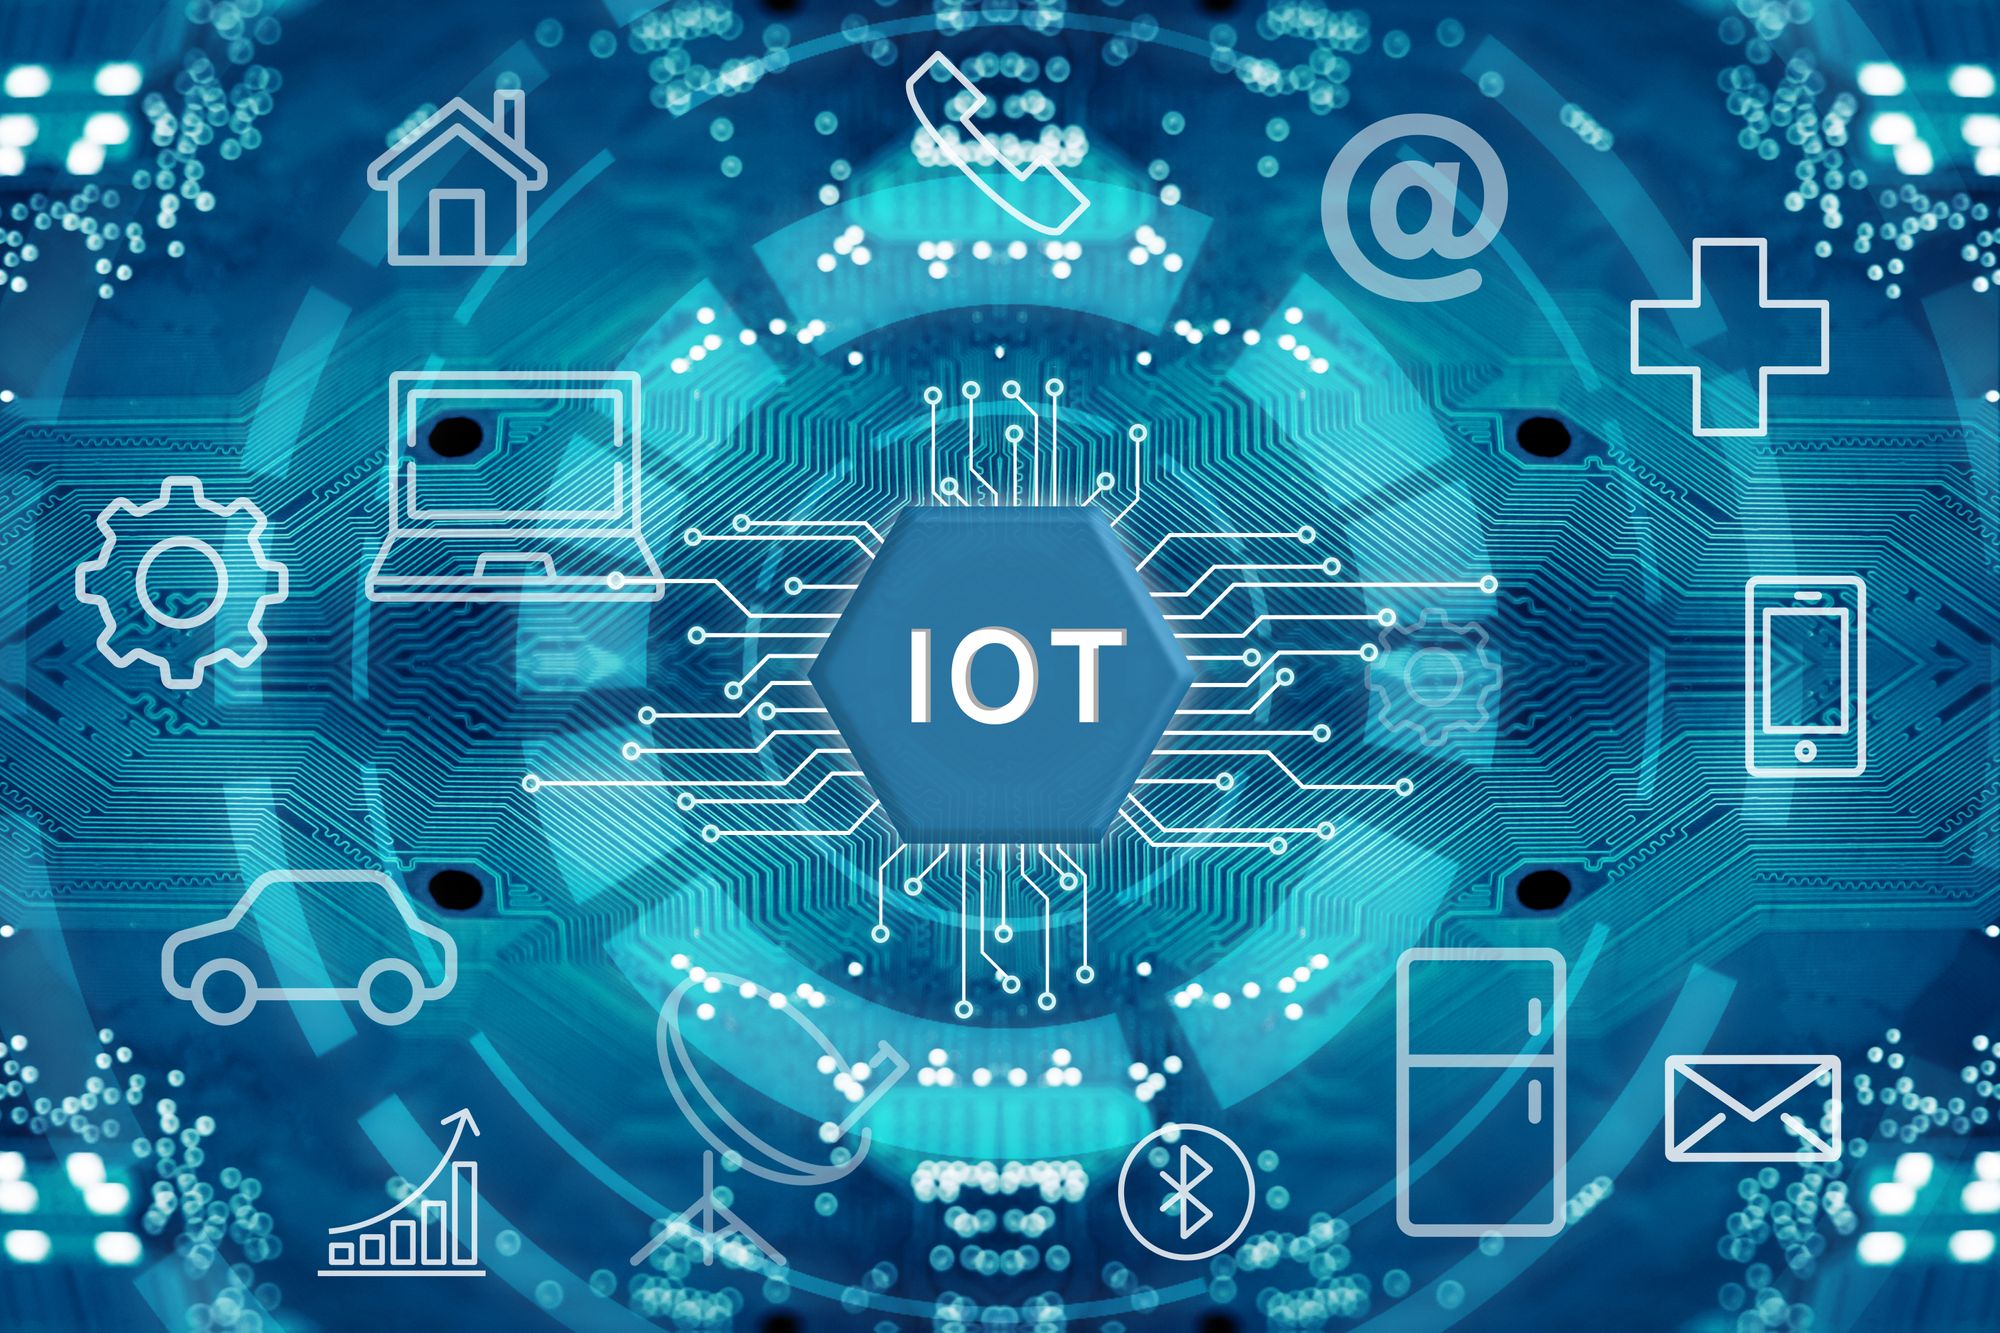 Helpful tools to get started in IoT Assessments